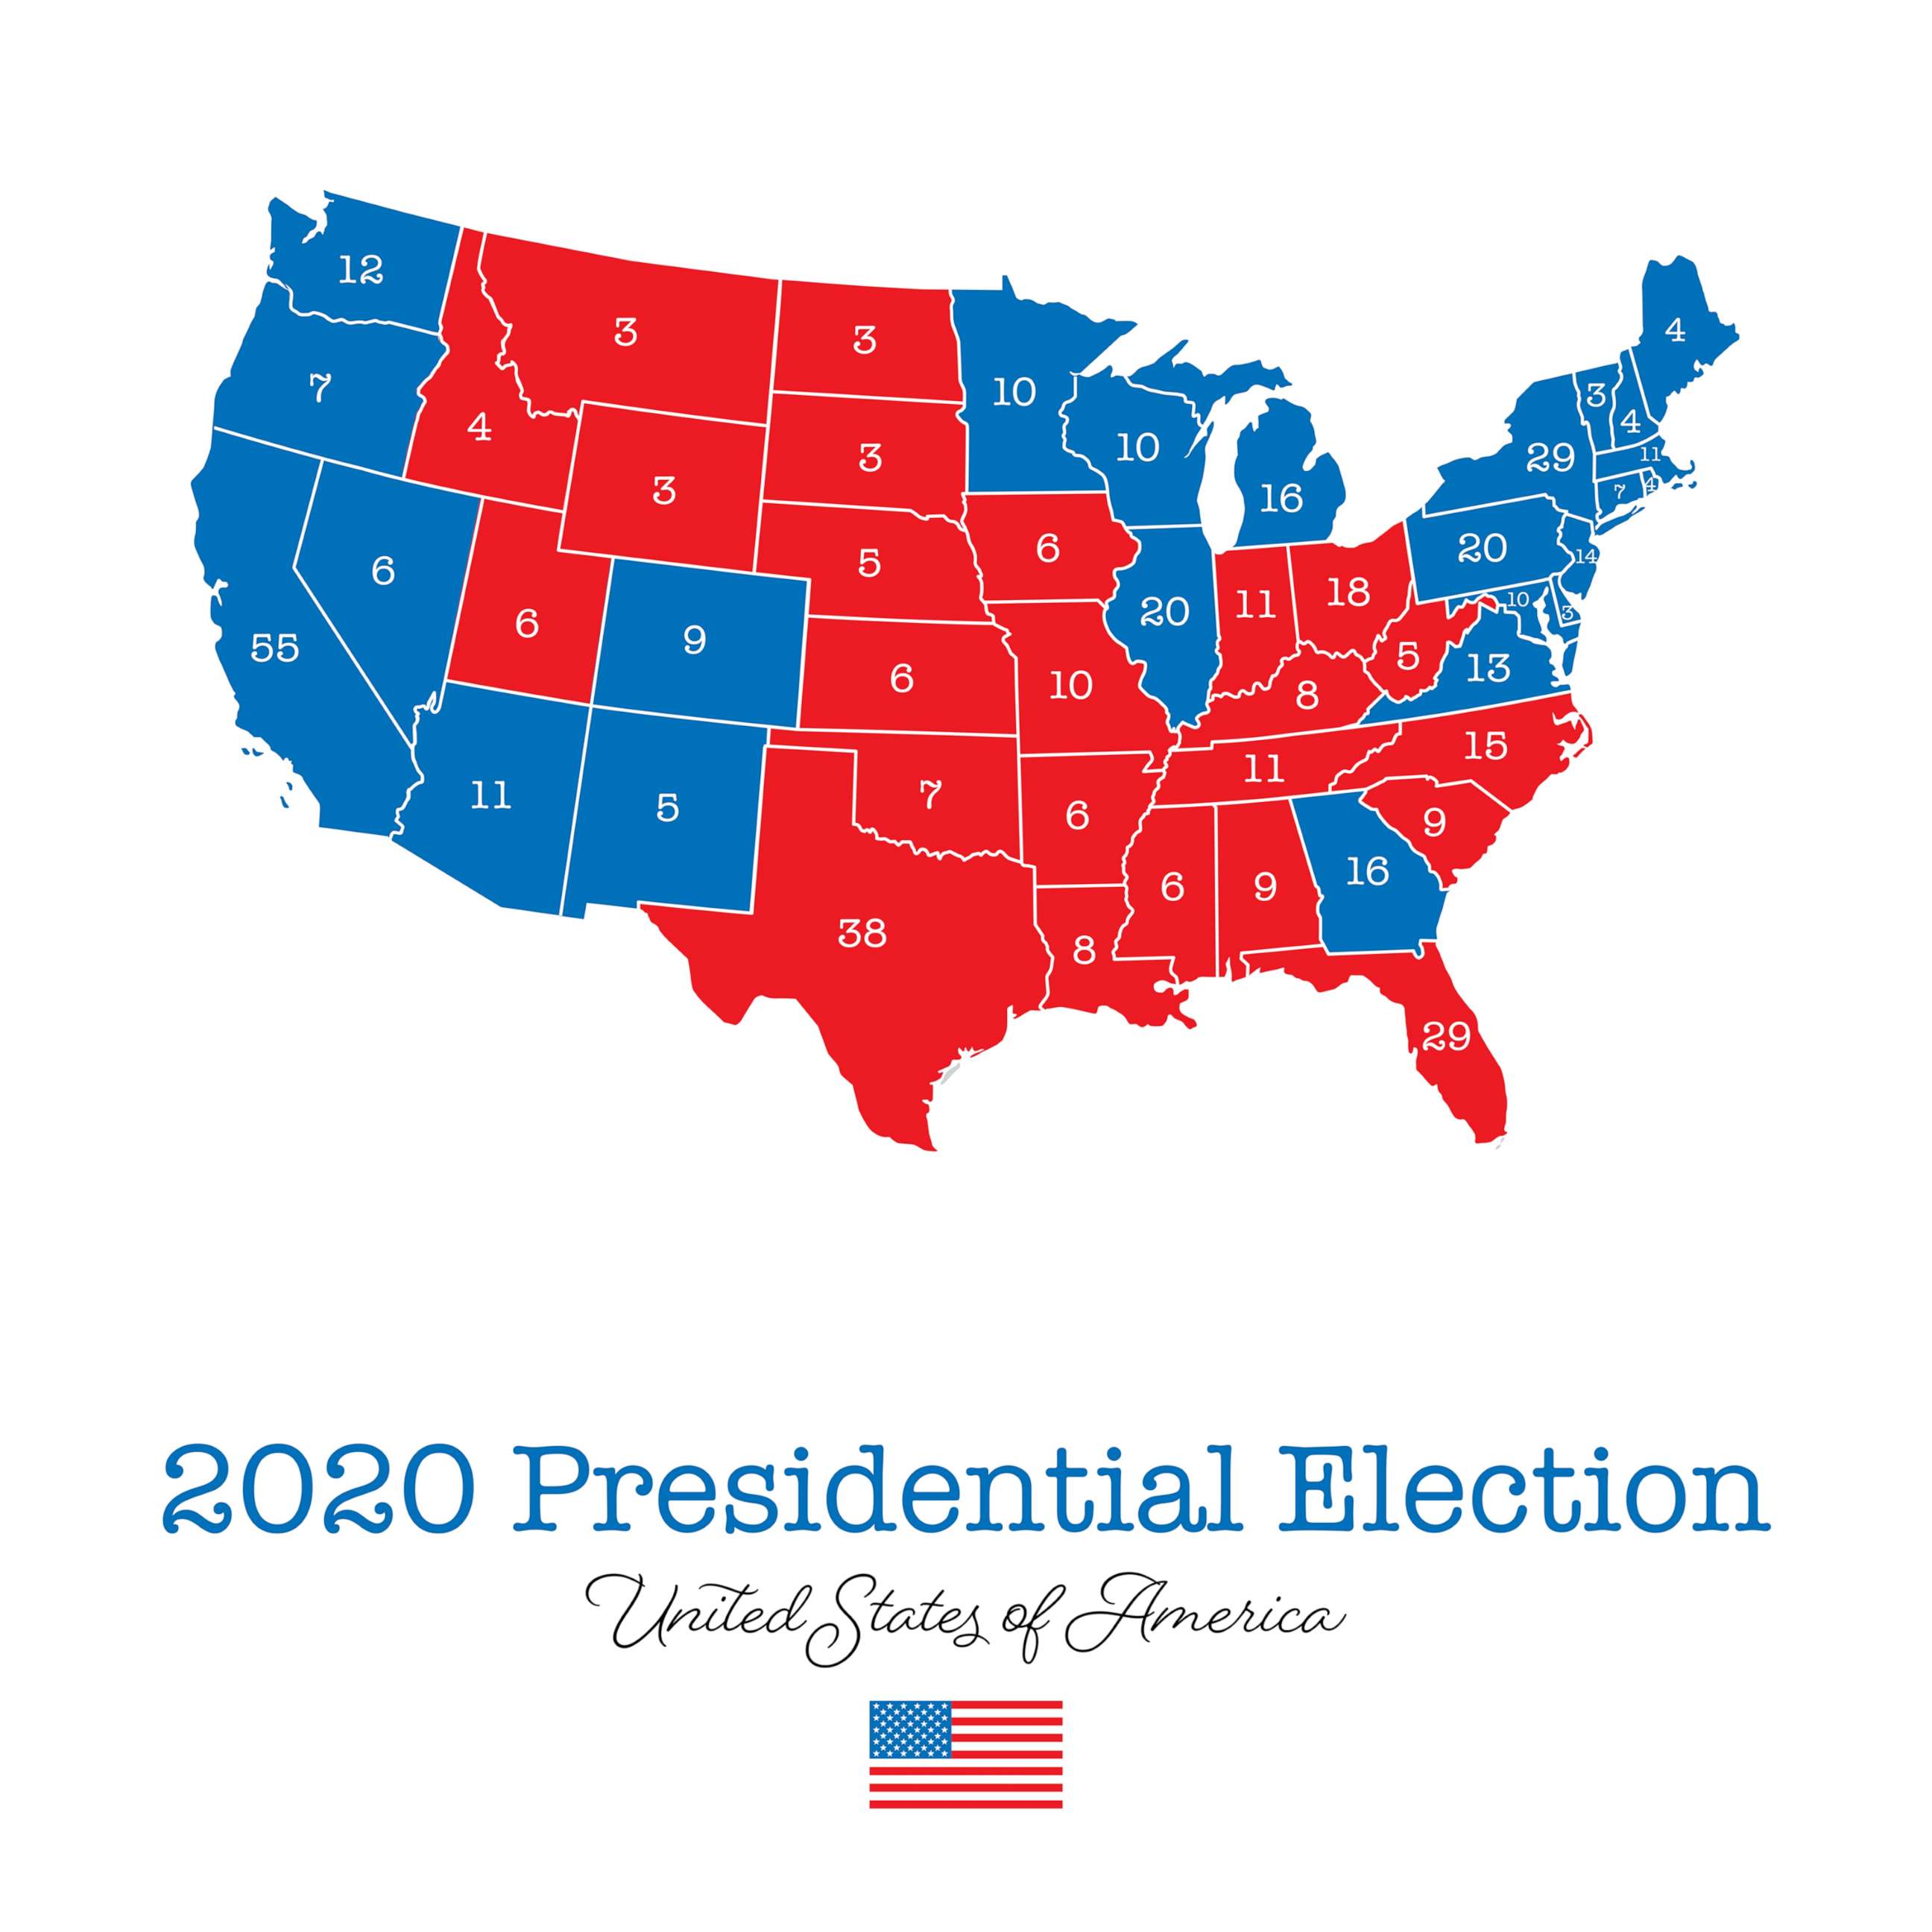 PHOTO: In this illustration, the electoral map for the 2020 Presidential Election is shown.